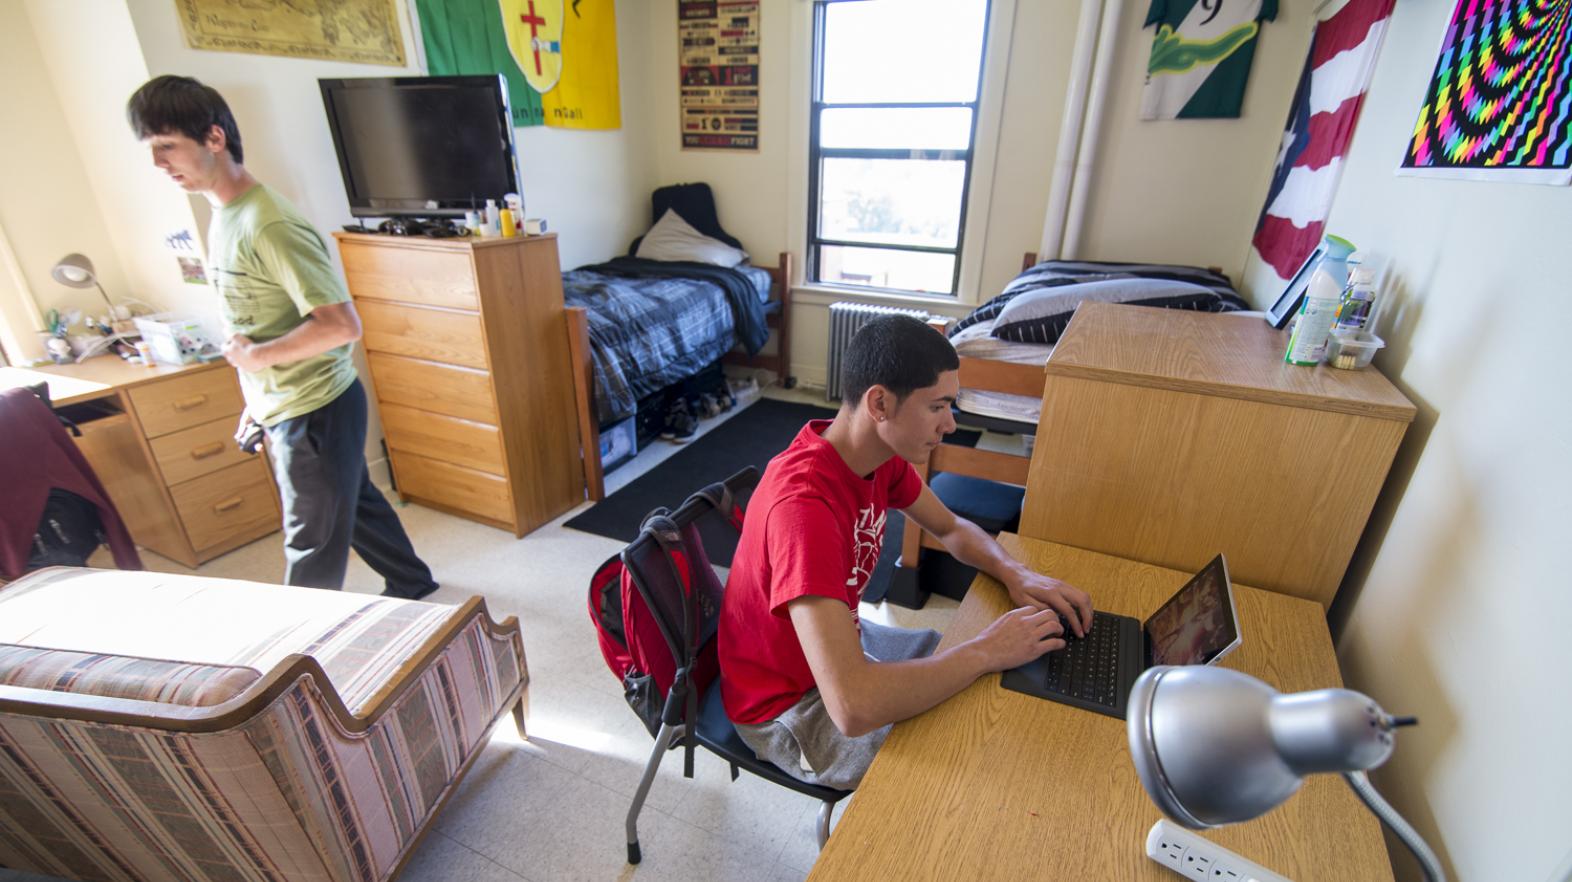 Students hang out in residence hall room